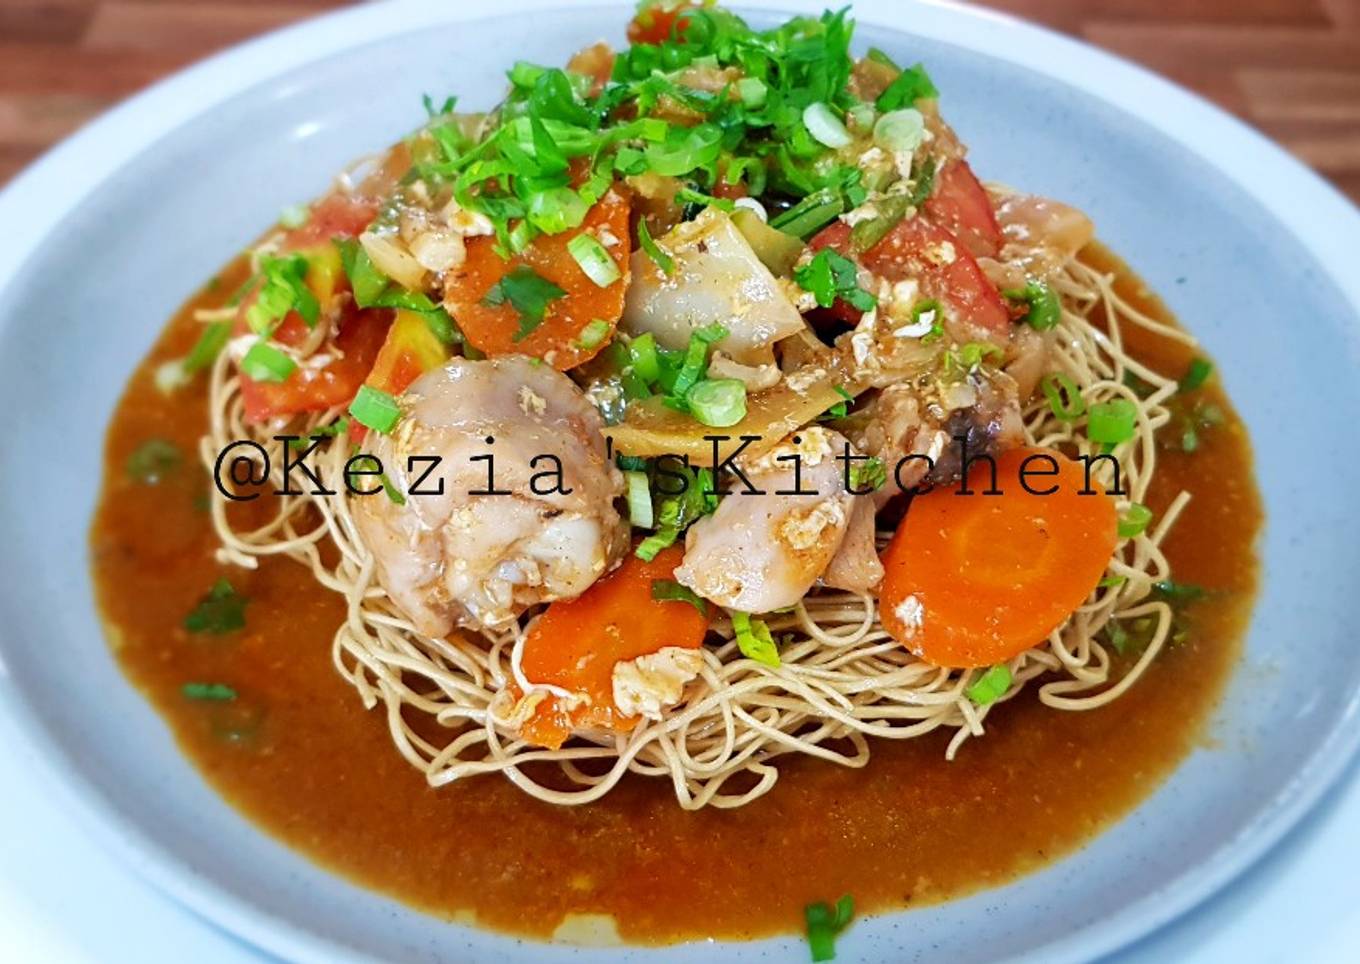 IFUMIE (Deep Fry Noodles Topped with Spicy Stir Vegetables)